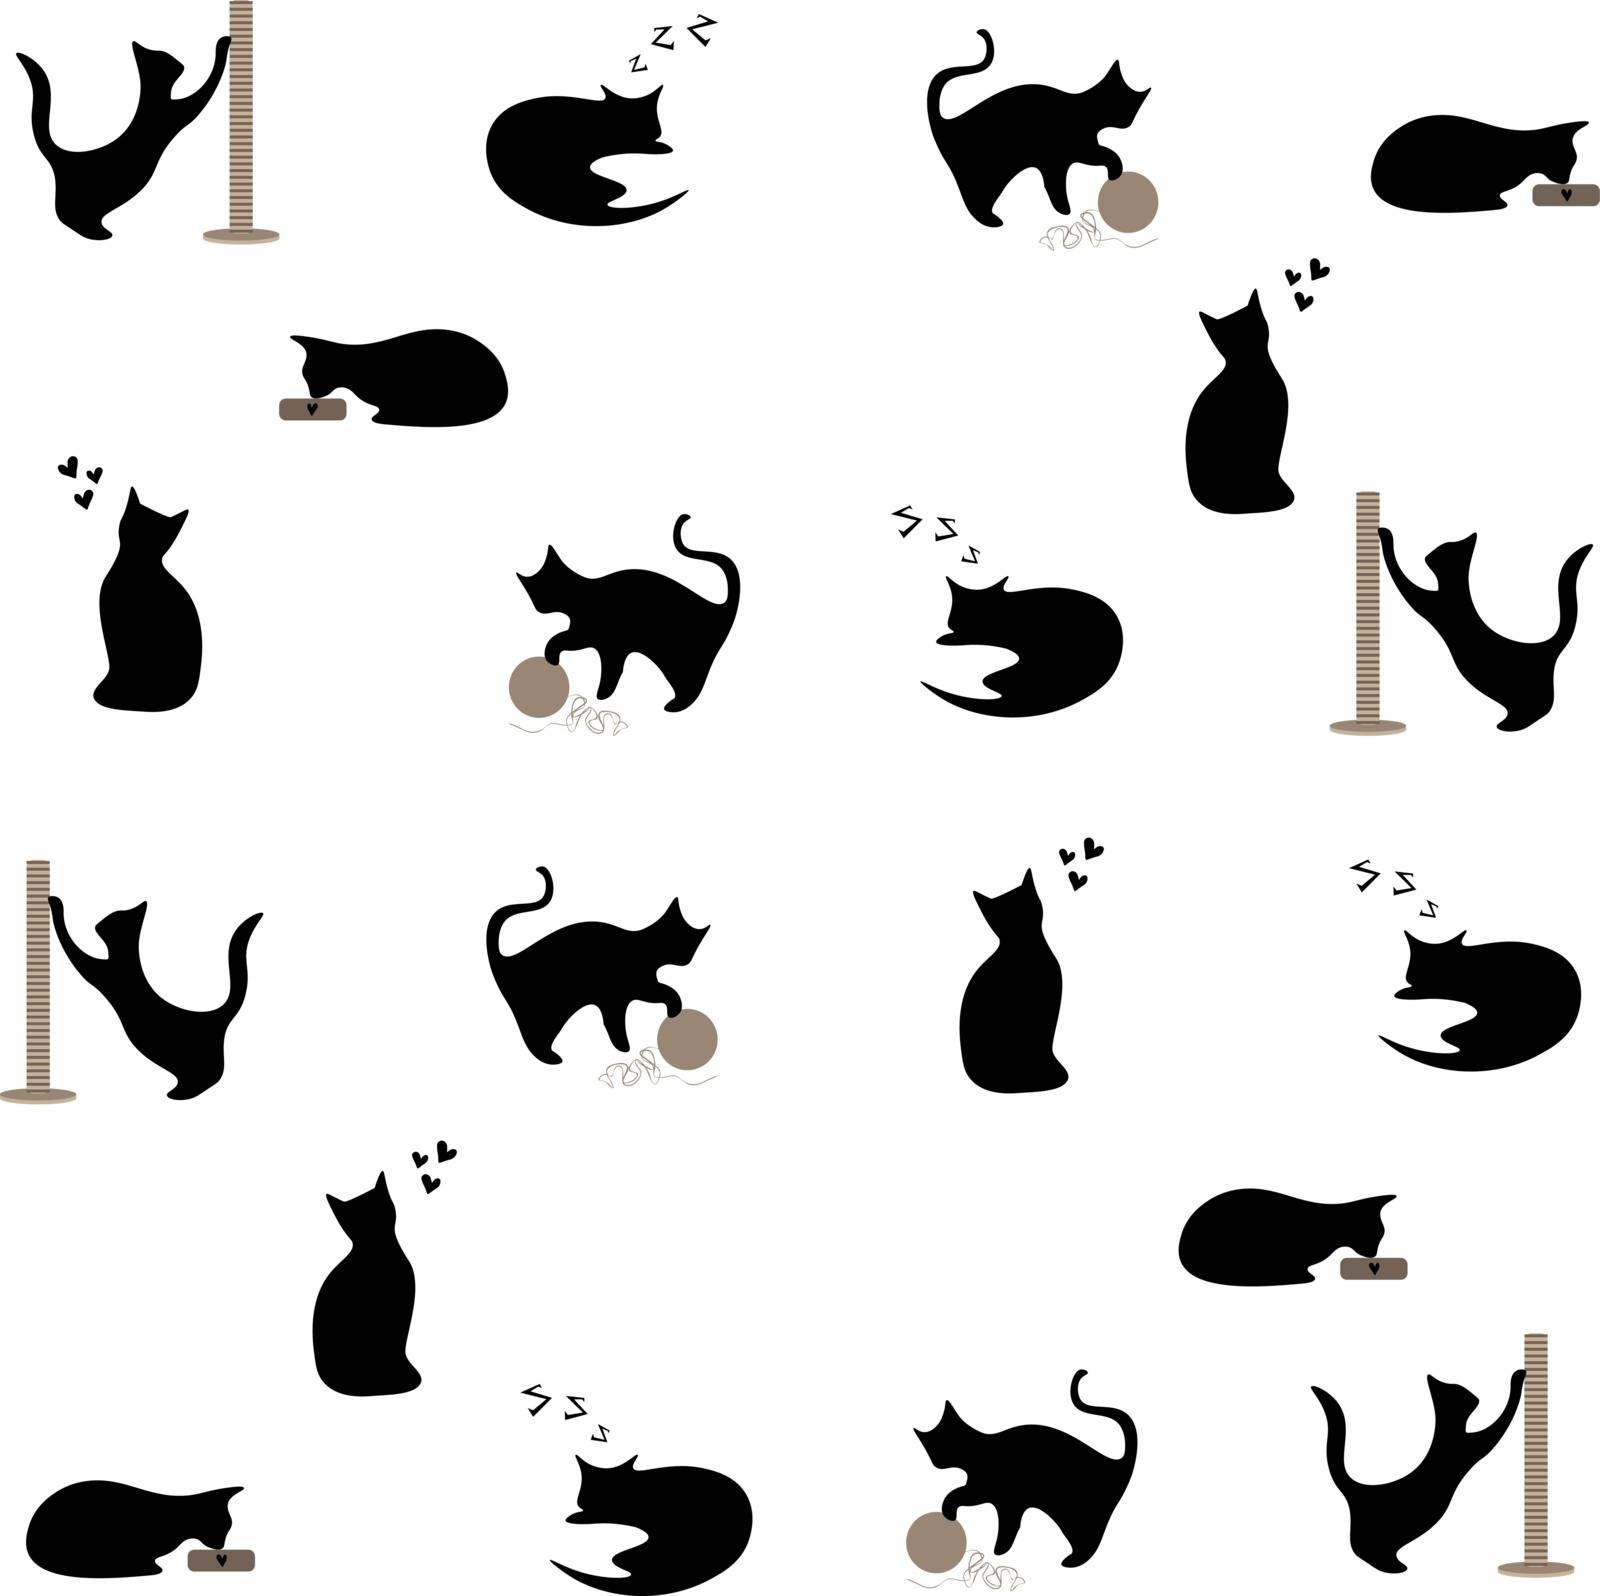 Playful black cats silhouettes background by paranoido